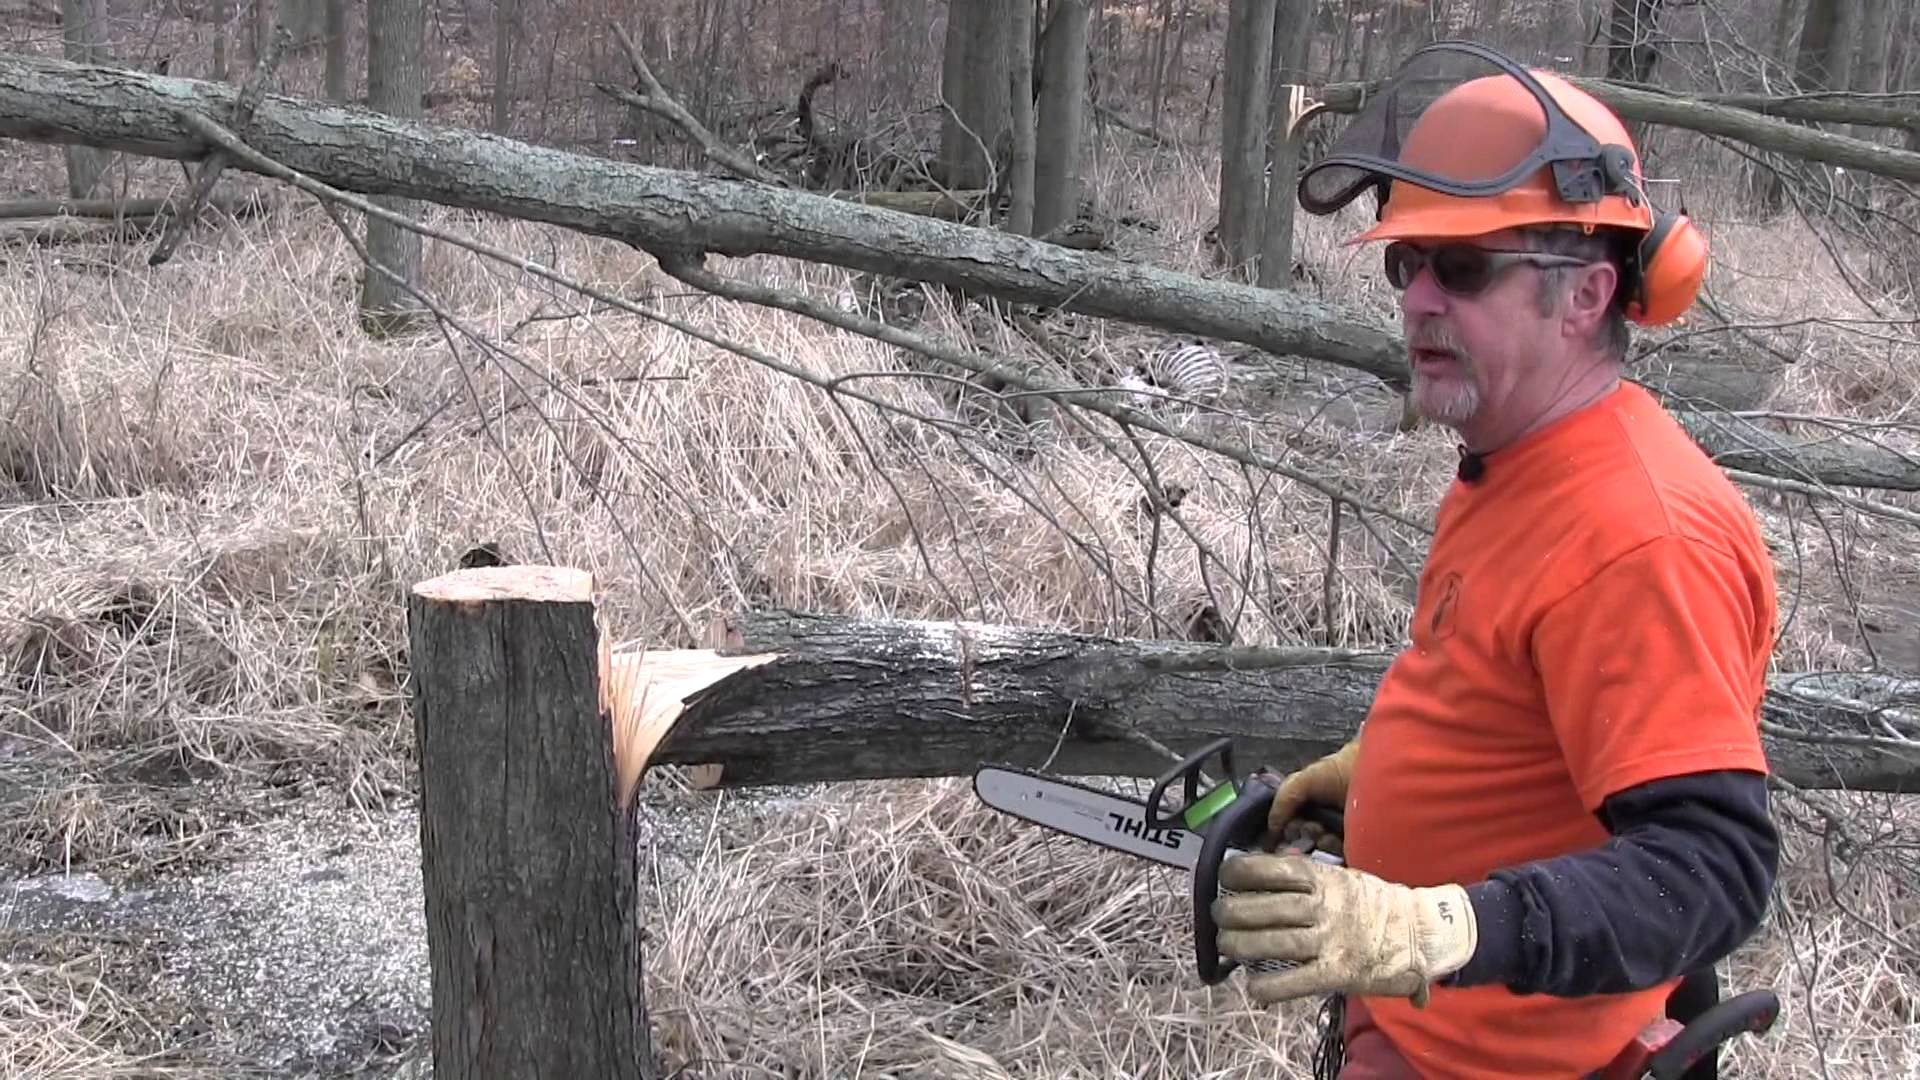 Importance of holding wood when hinge cutting trees for deer habitat ...